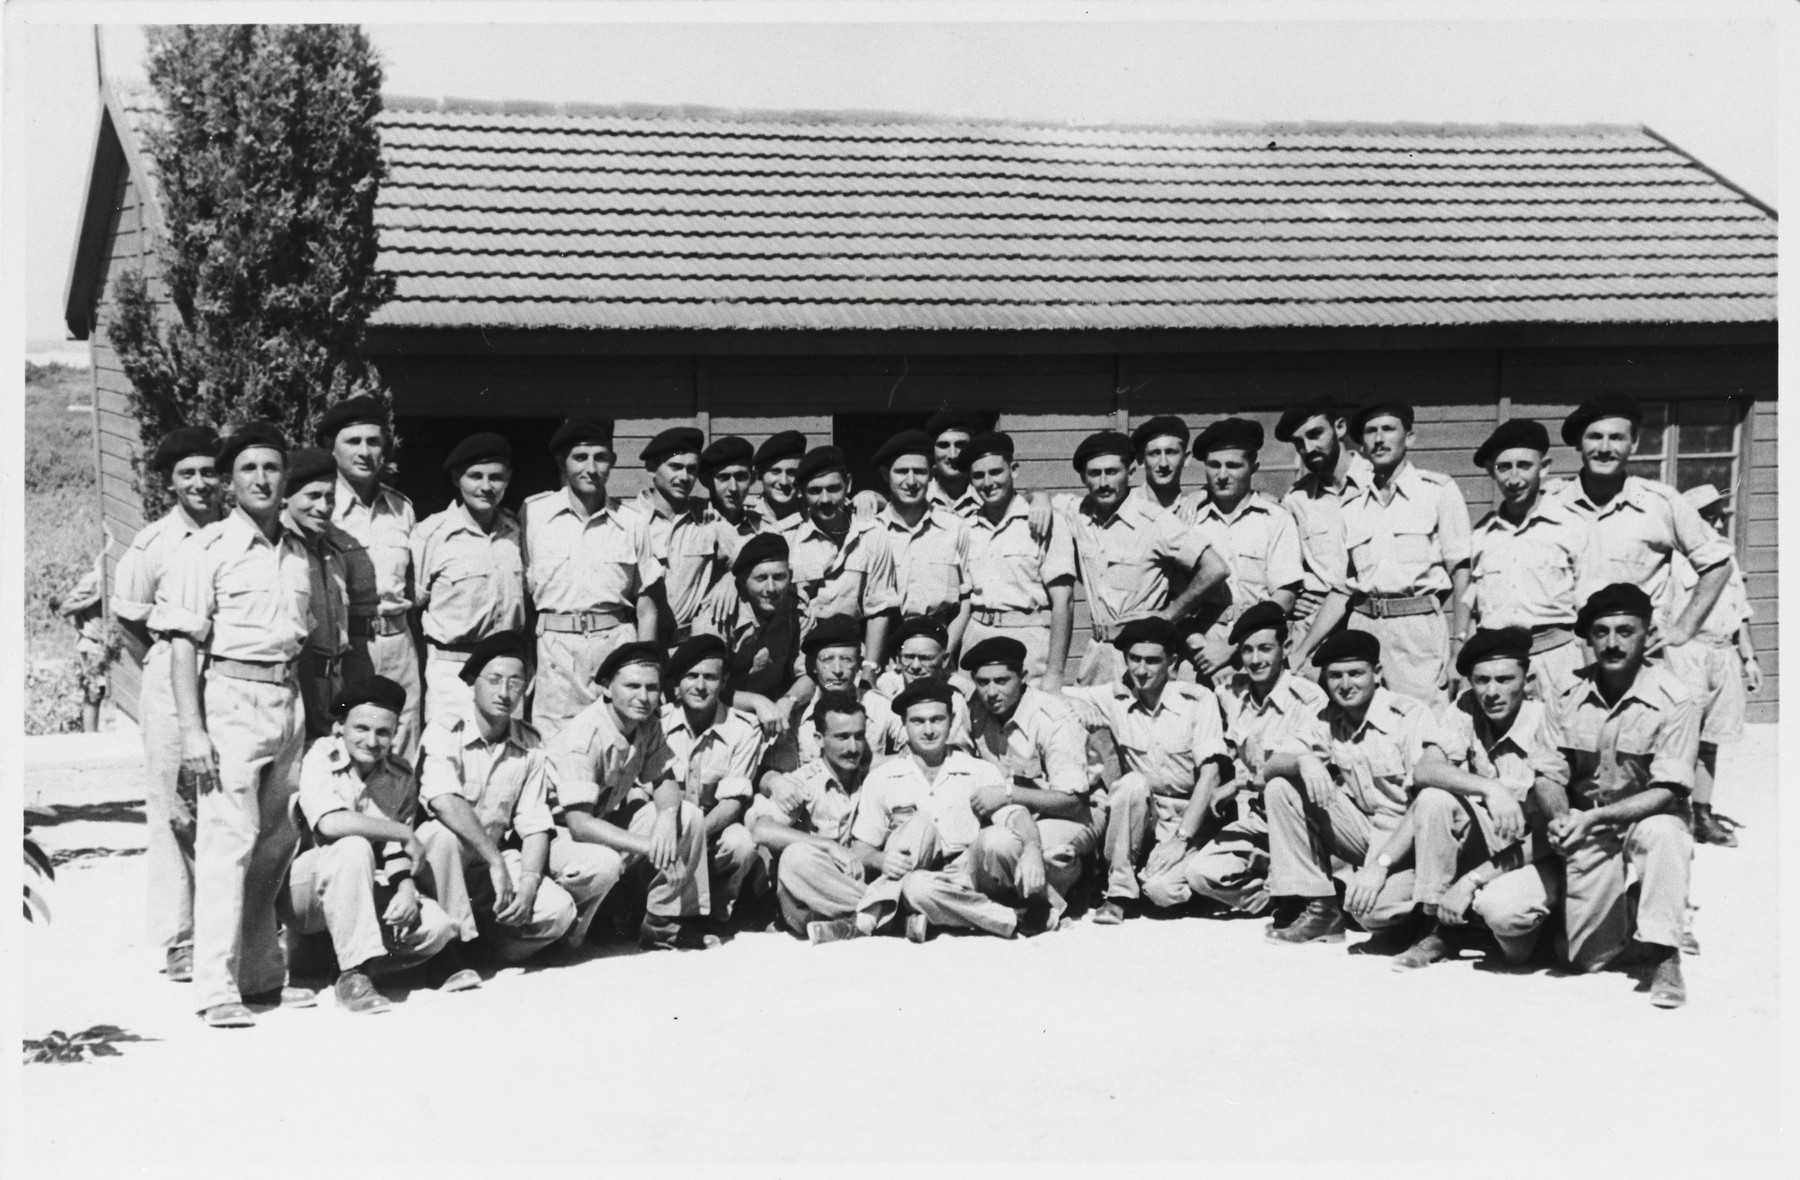 Group portrait of soldiers in a field artillery officers course.

Among those pictured is Shmuel Shalkovsky.